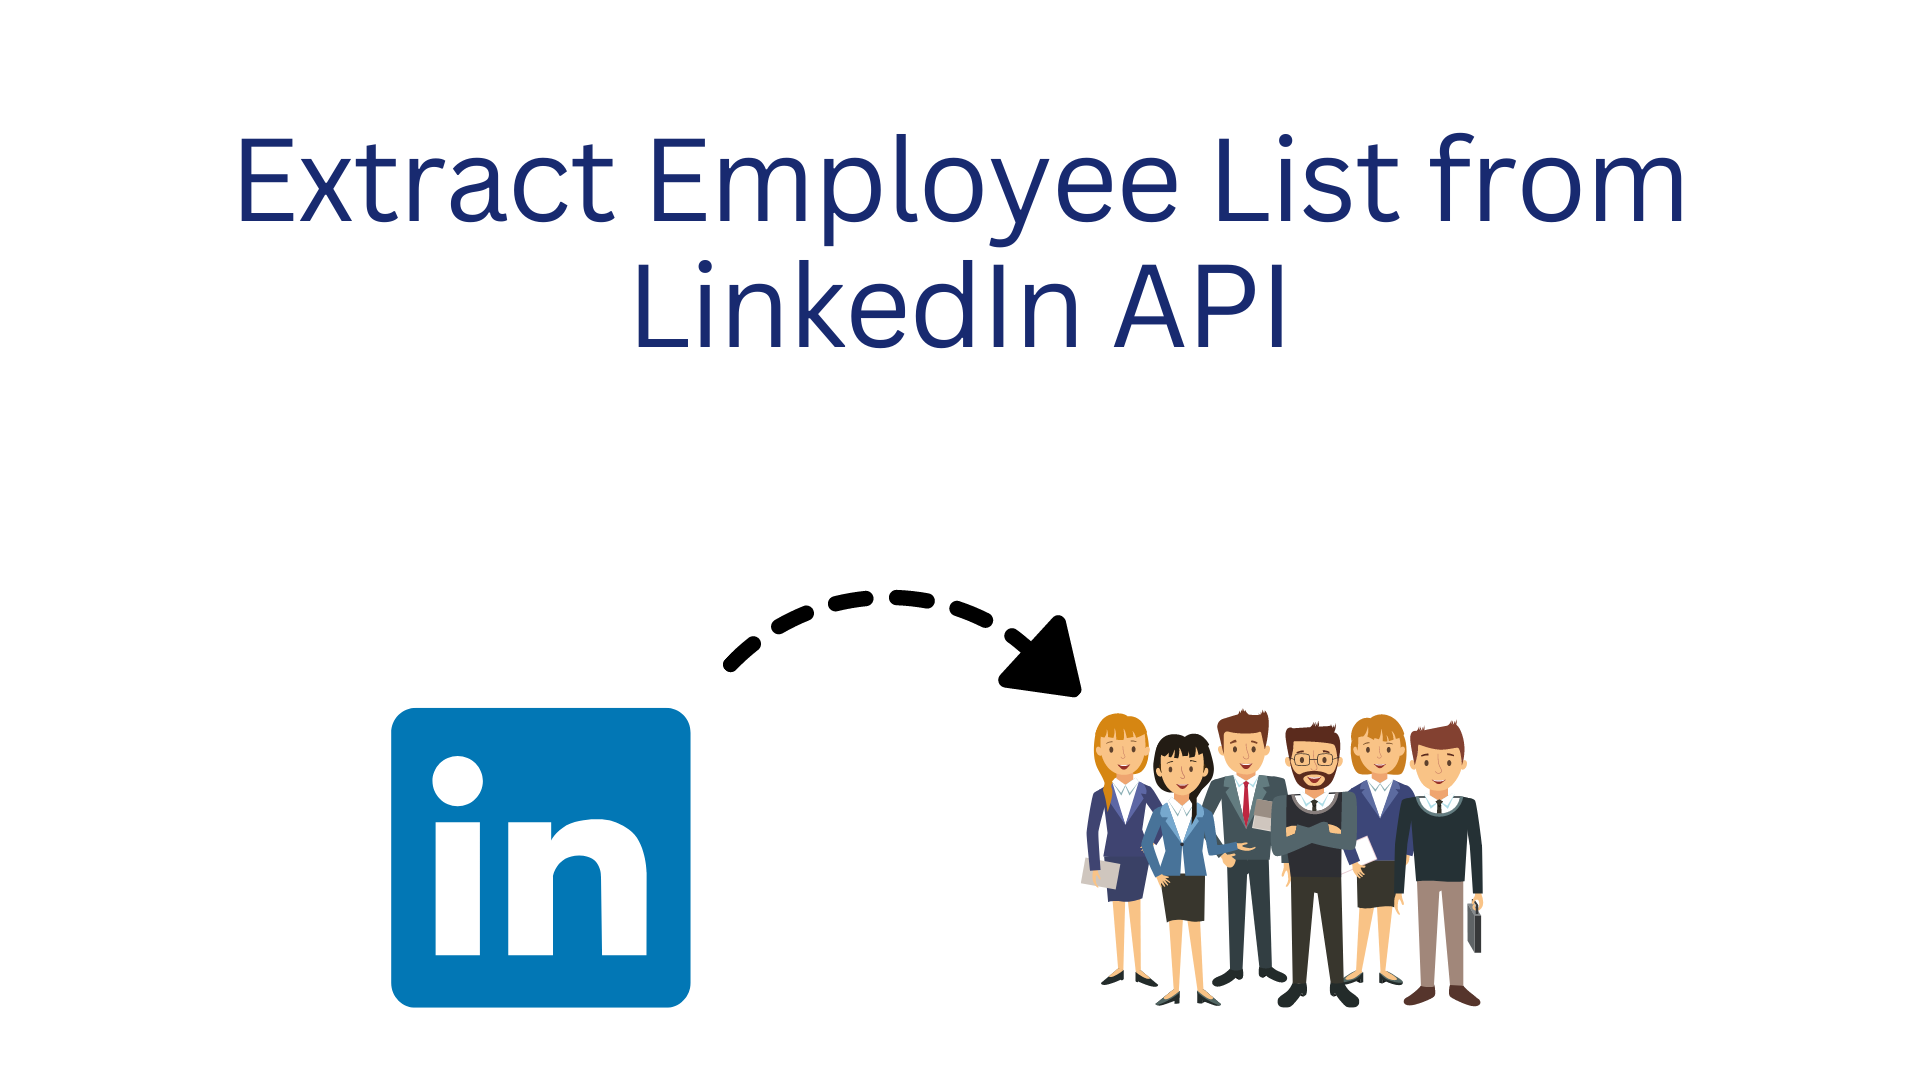 How To Extract Employee List from LinkedIn API